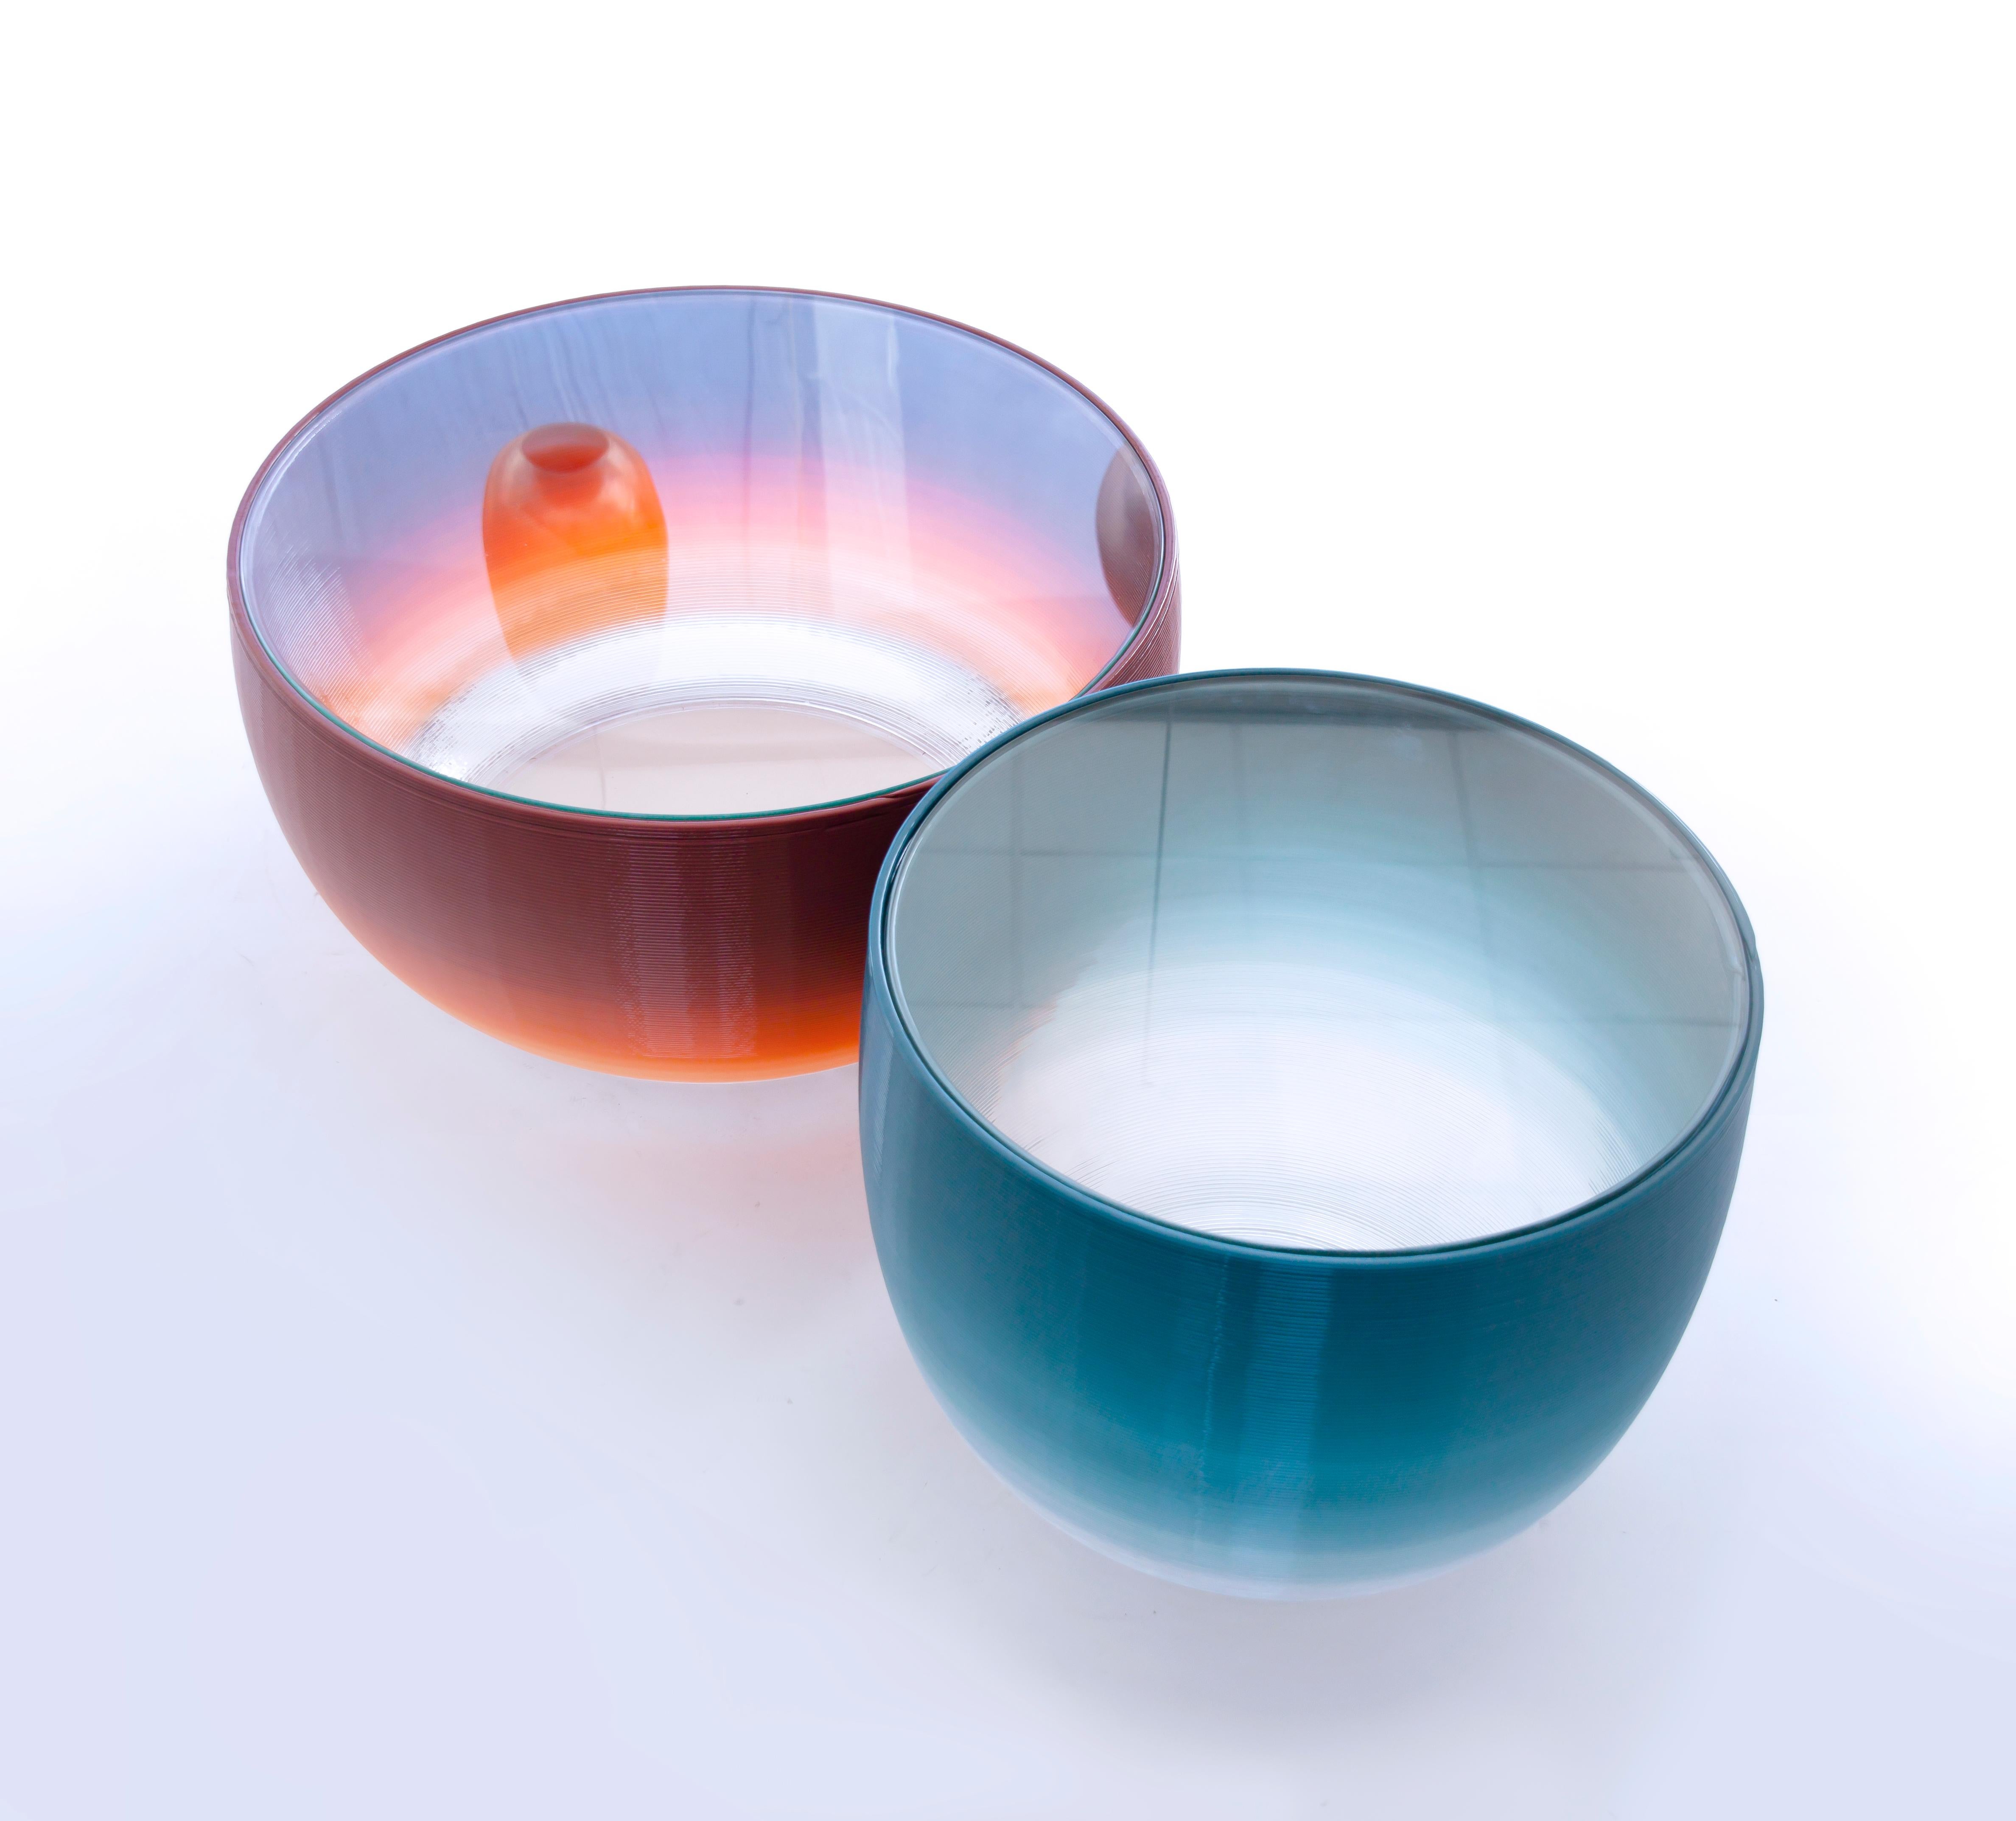 Degradé is a collection of lamps and tables that explores 3D printing technology in order to achieve a unique gradient effect, evoking the color palette that we can find in a clear sunset sky. The pieces are printed in one piece with an industrial